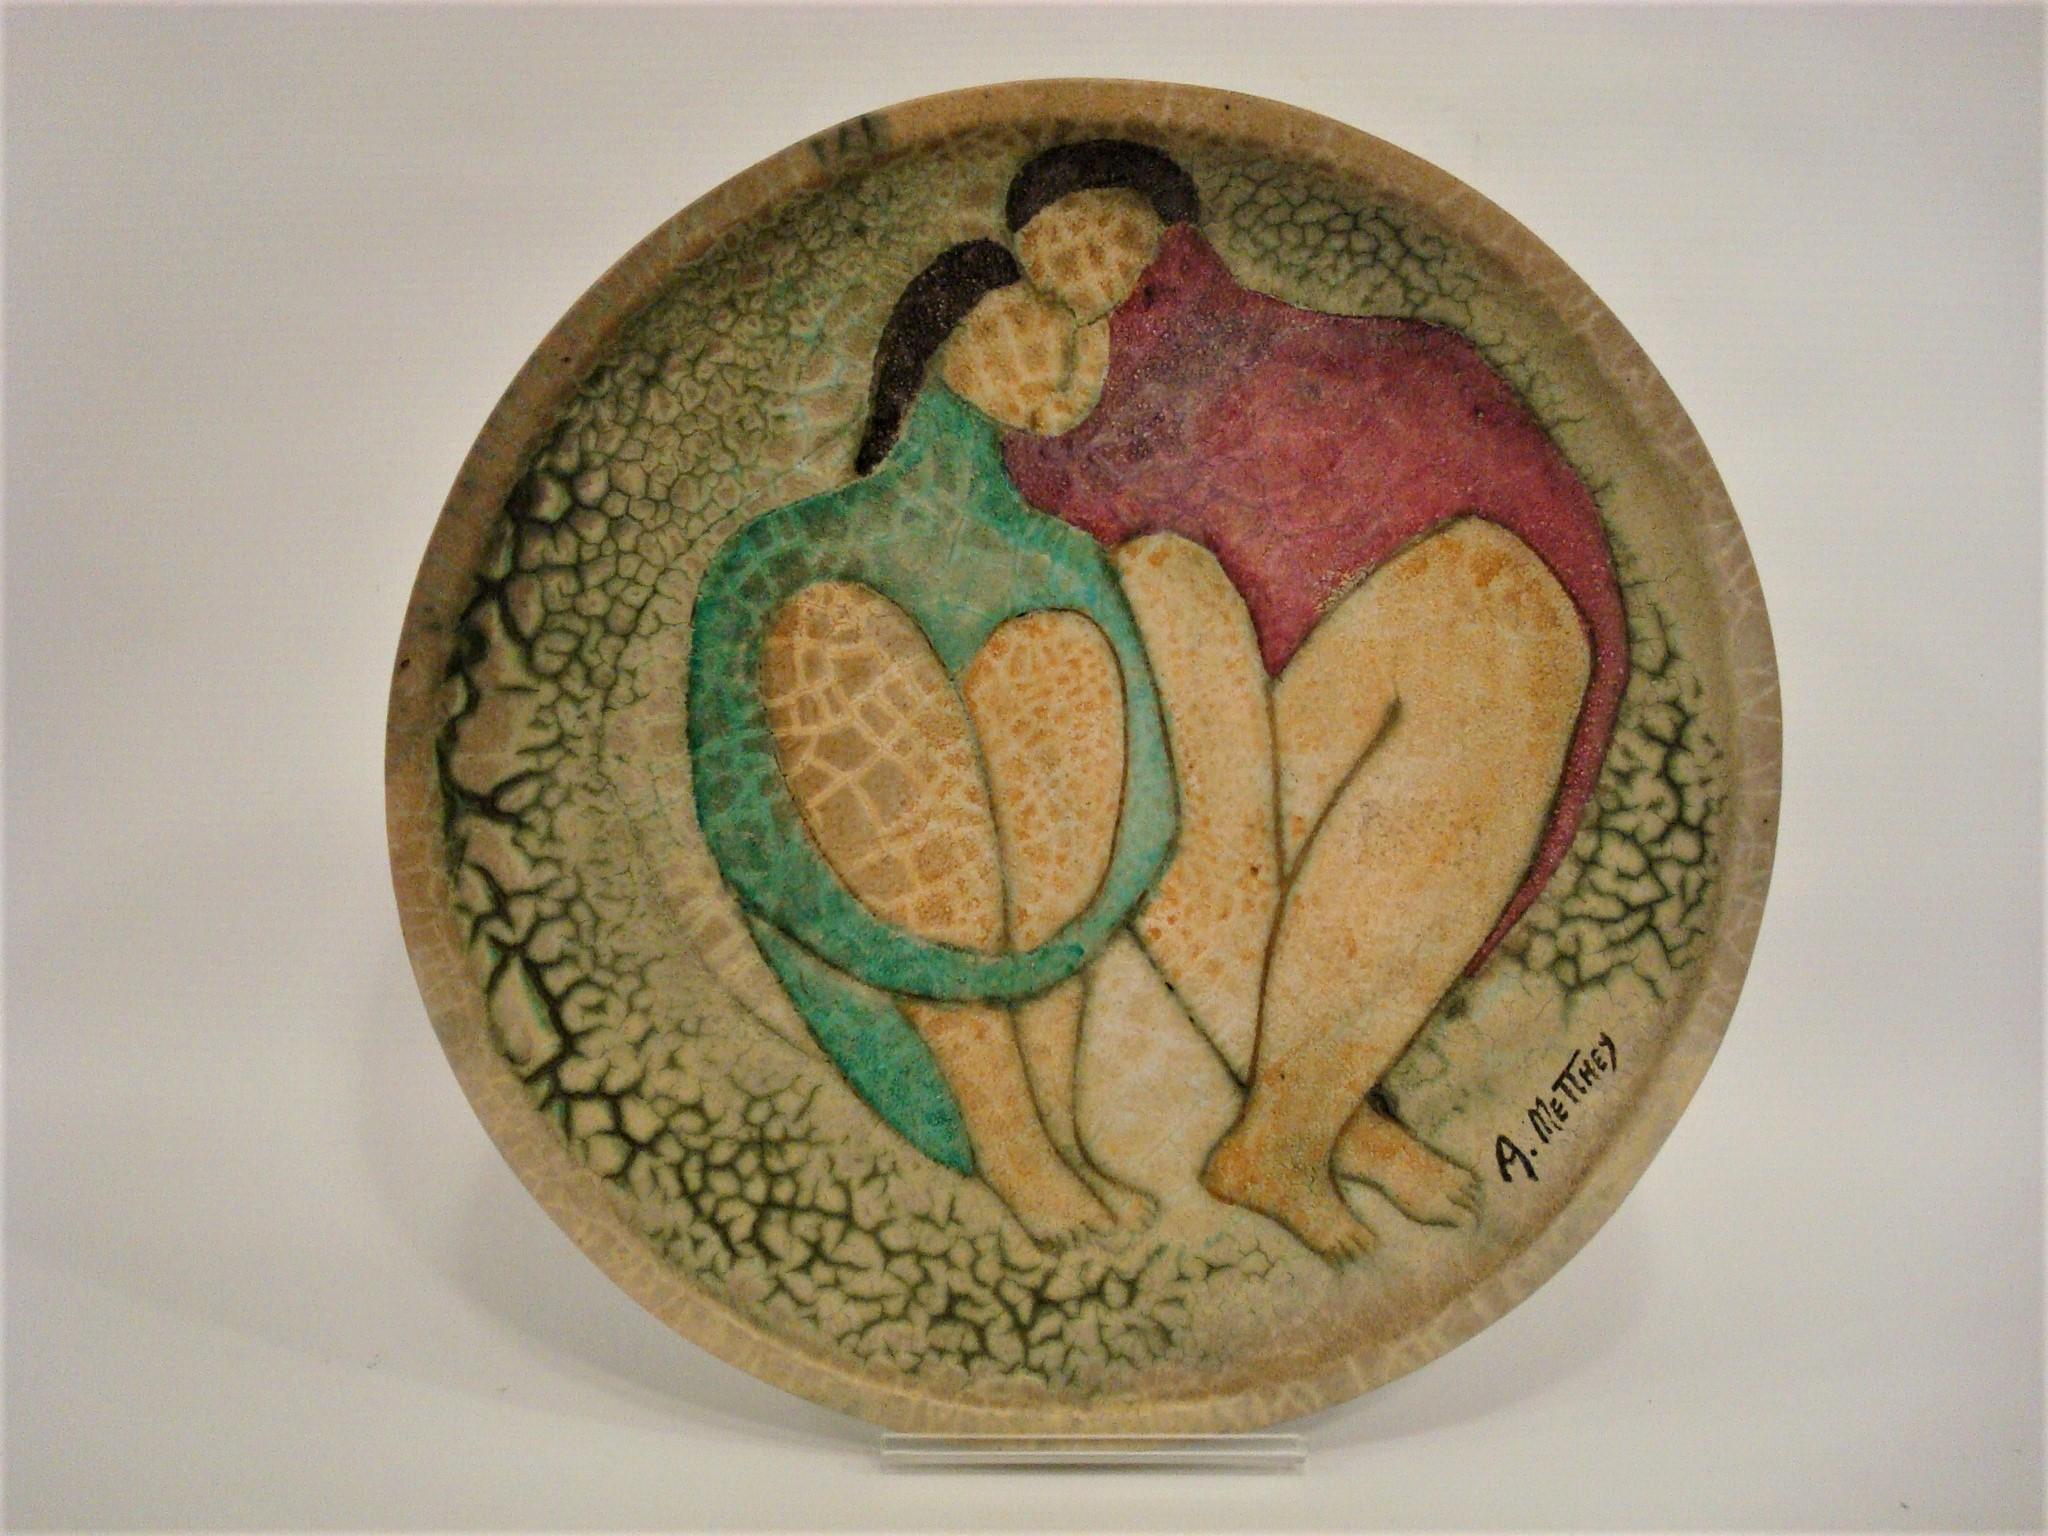 Fantastic Art Deco Wall Glazed Ceramic Plate. A couple in Love. Very Romantic, both legs together form a heart. Spectacula piece of a fantastic Artist.
André Metthey – or Méthey name under which he signed his first works – is a ceramist born June 4,